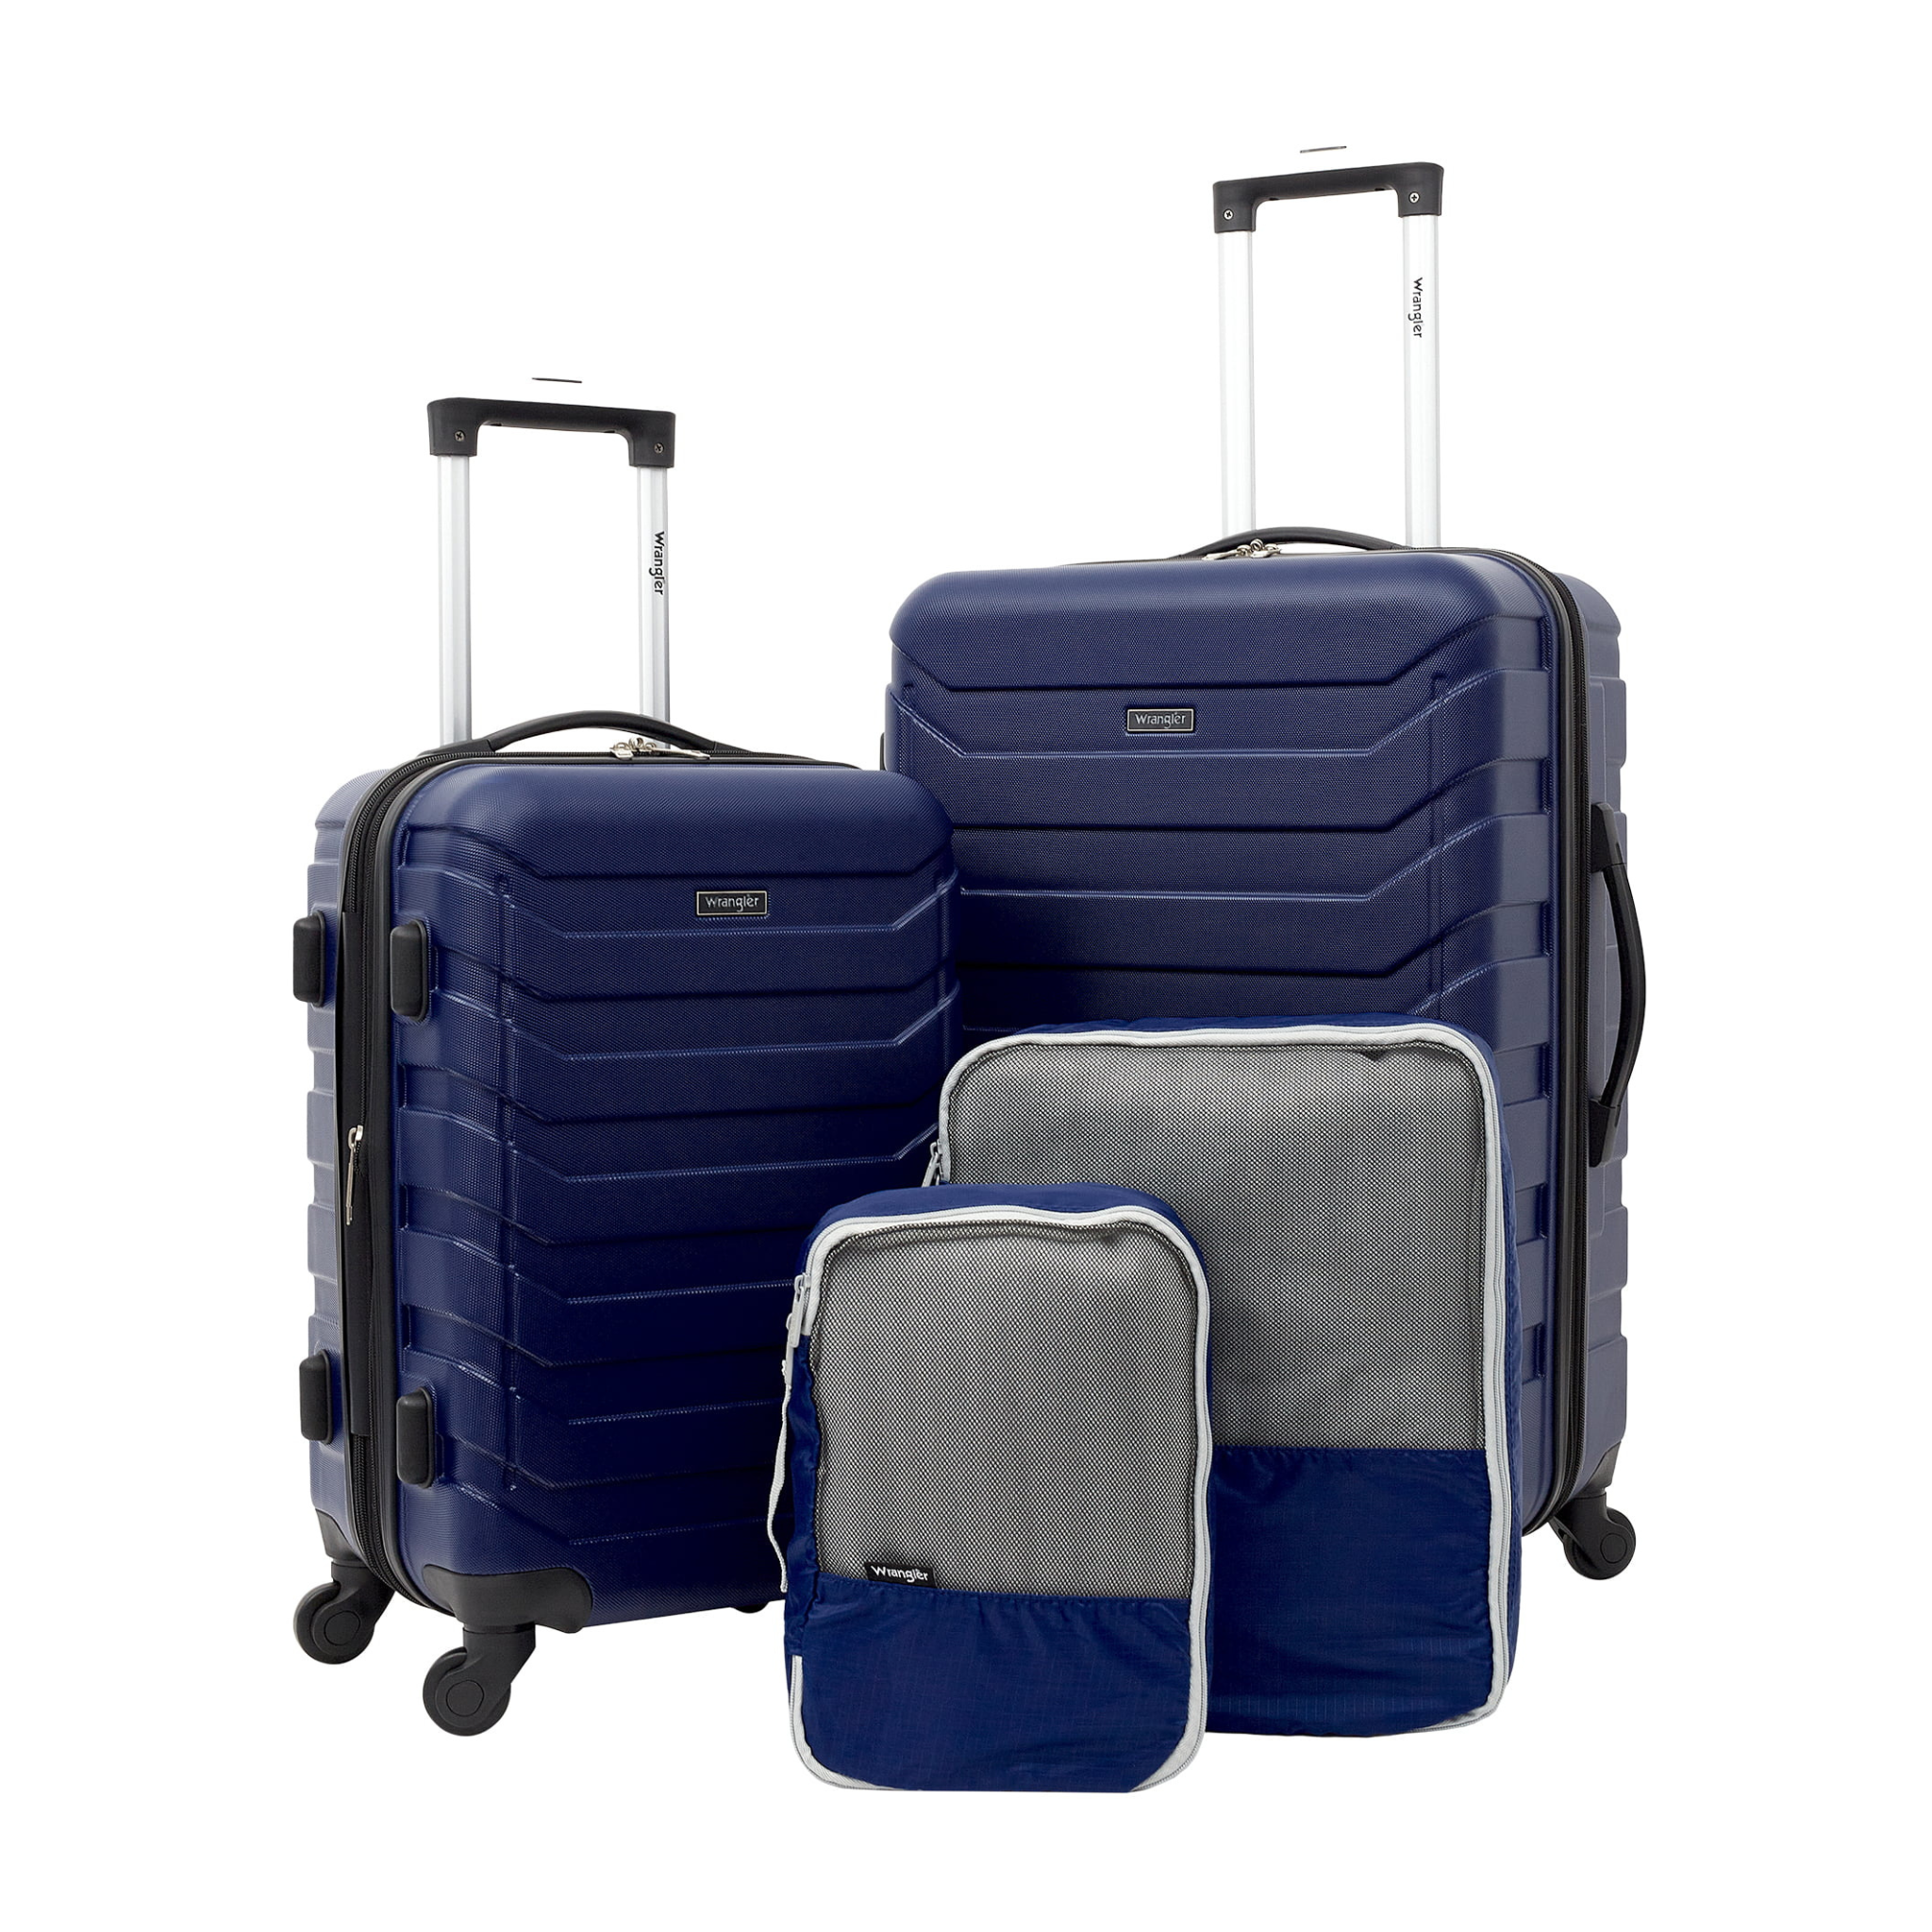 4-Piece Wrangler Luggage and Packing Cubes Set